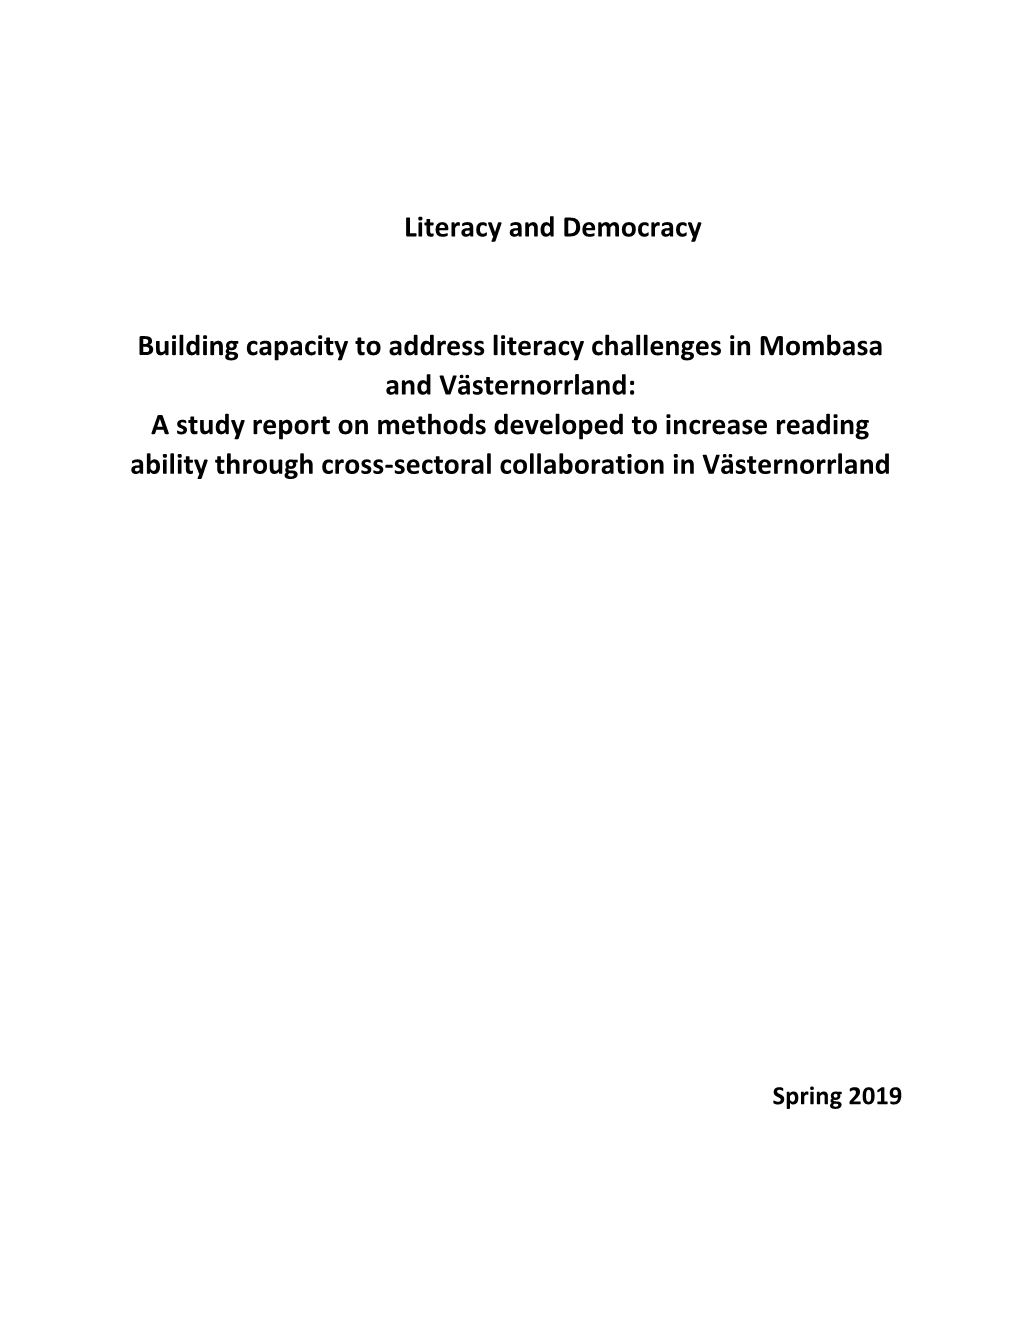 A Study Report on Methods Developed to Increase Reading Ability Through Cross-Sectoral Collaboration in Västernorrland